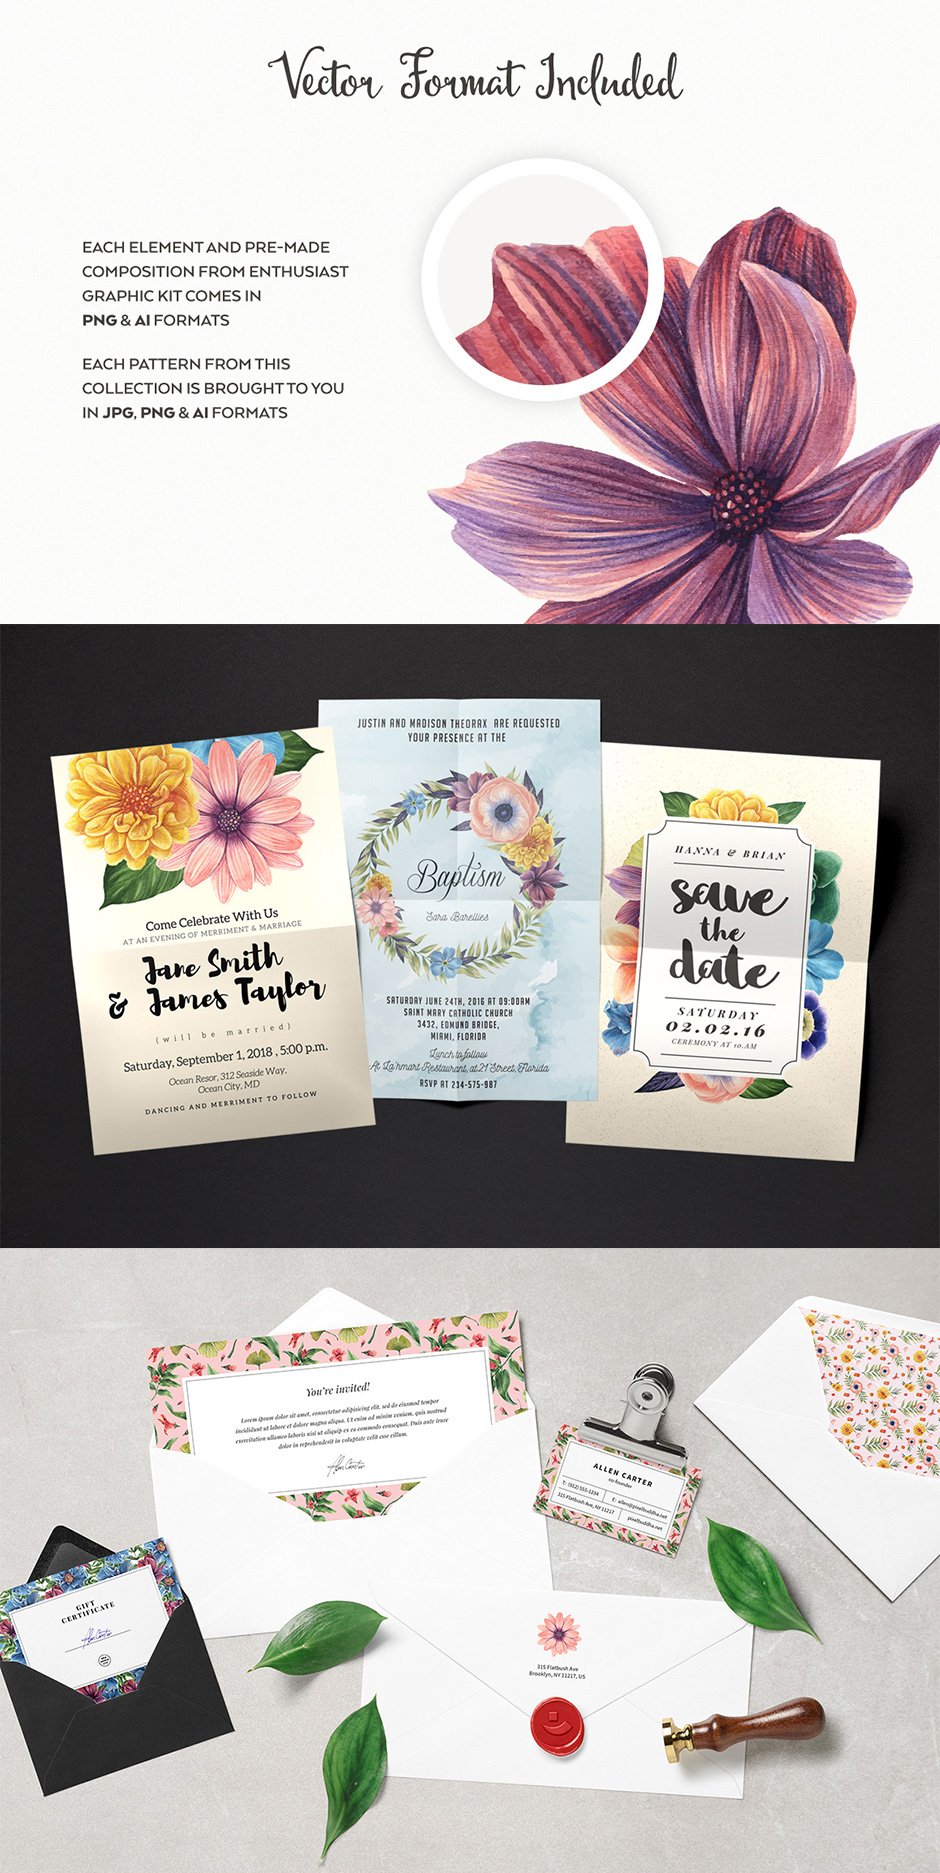 Watercolor Enthusiast Graphic Kit